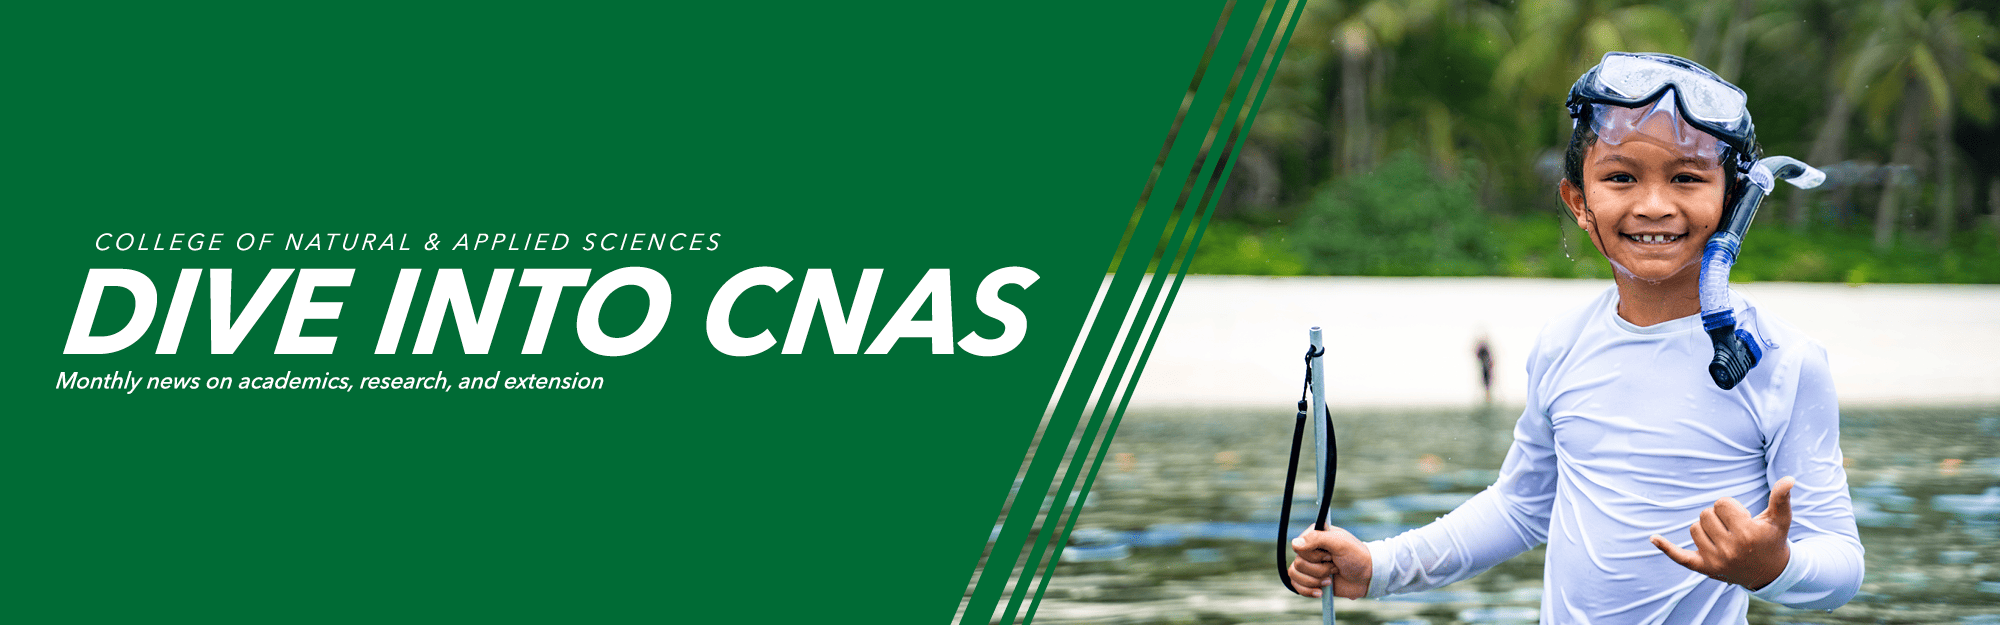 Check out our Dive Into CNAS newsletter for the latest extension news!